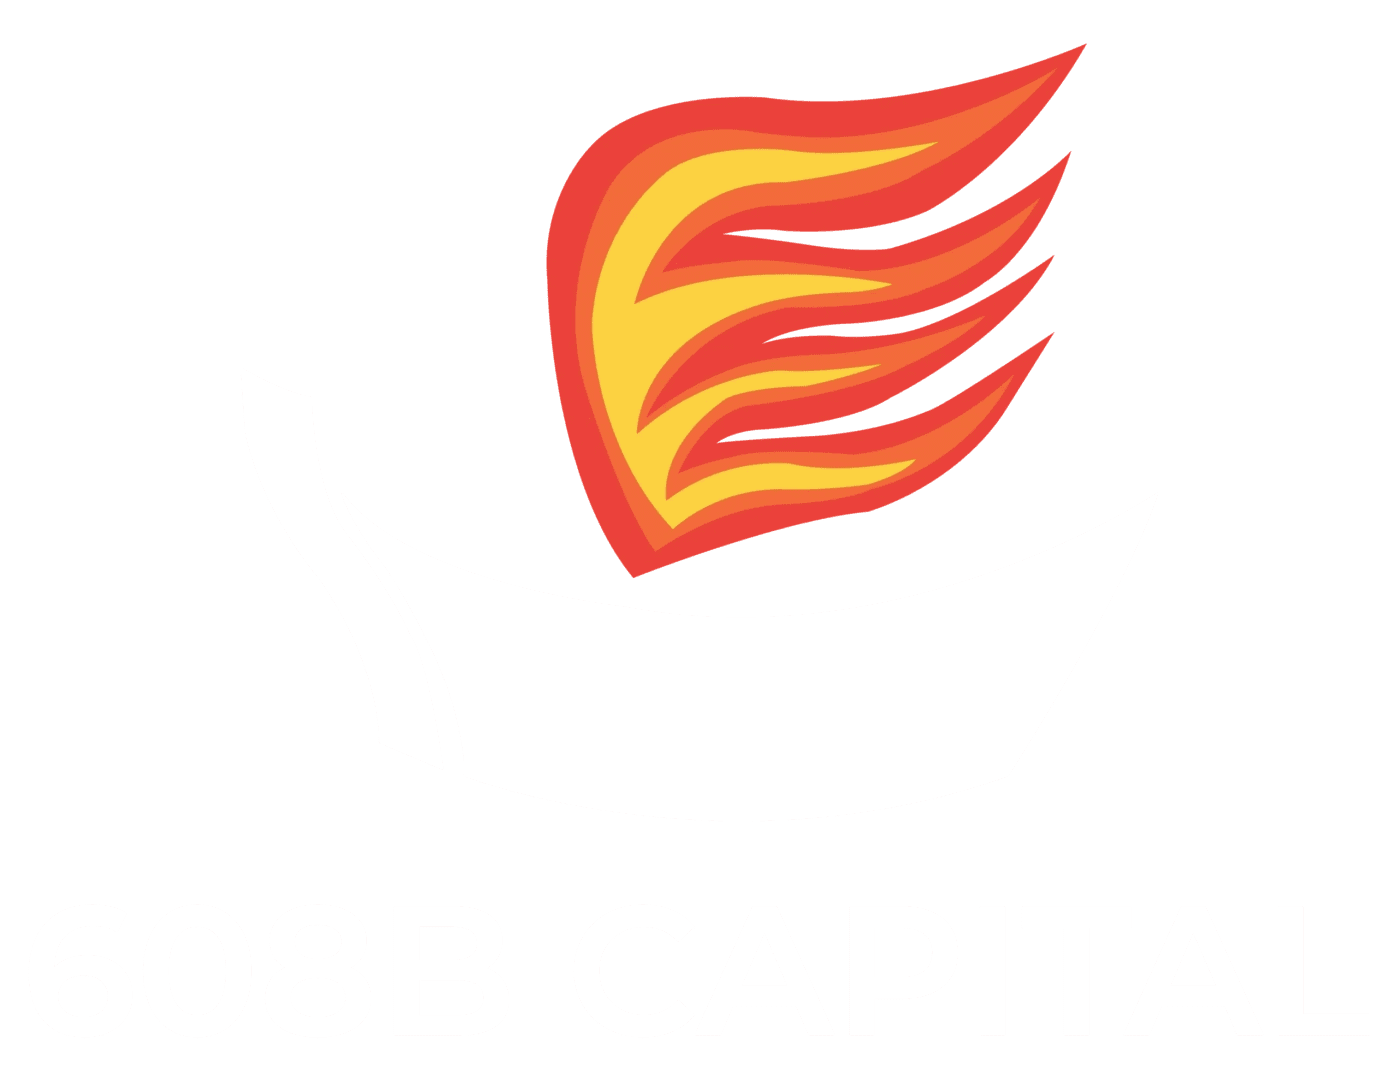 A picture of the logo for 0 8 b capital.